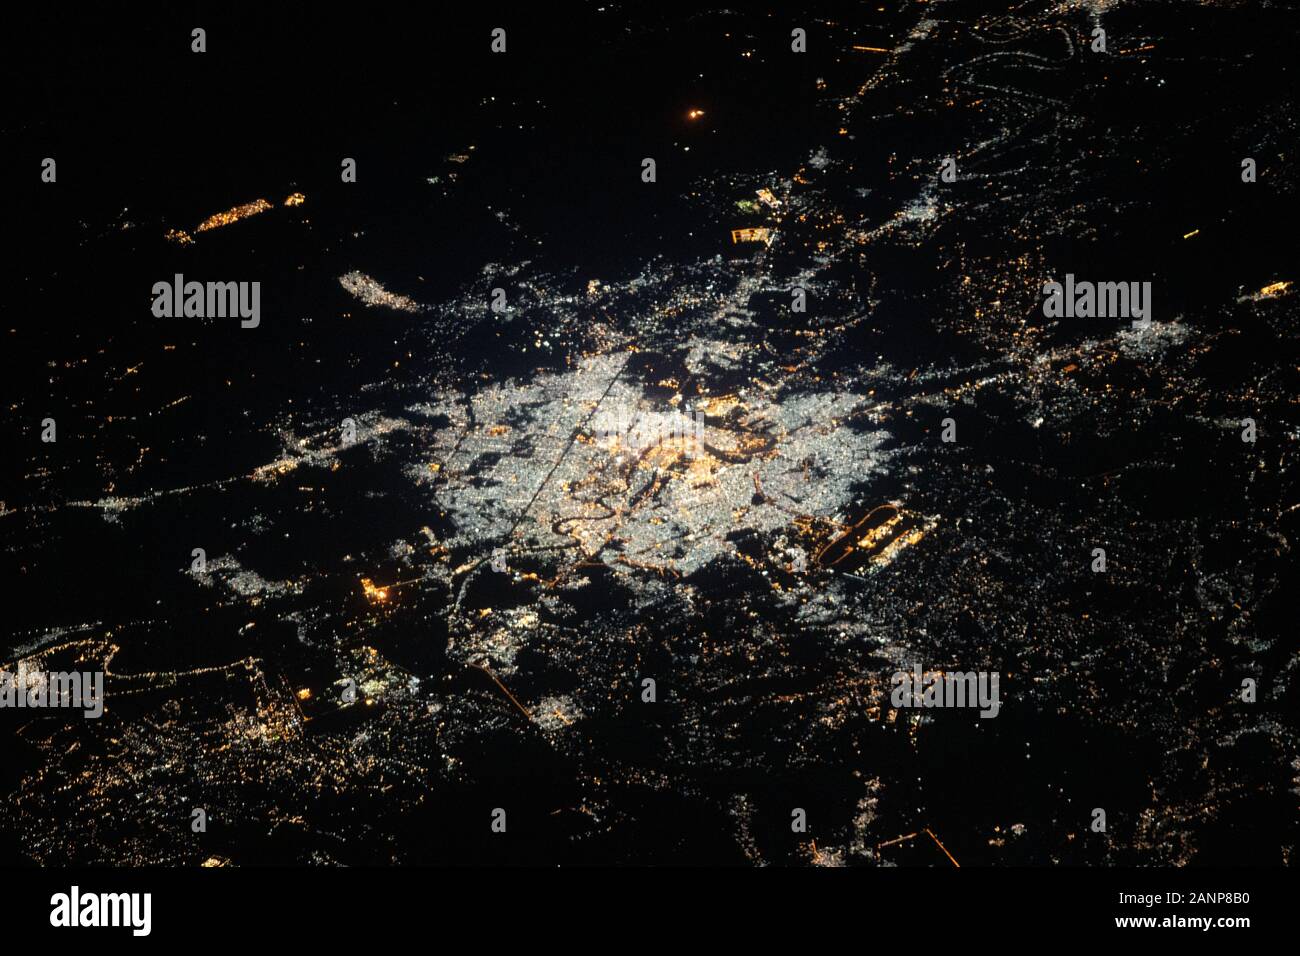 IRAQ - 4 Jan 2020 - Baghdad Iraq as seen by an astronaut on the International Space Station Stock Photo